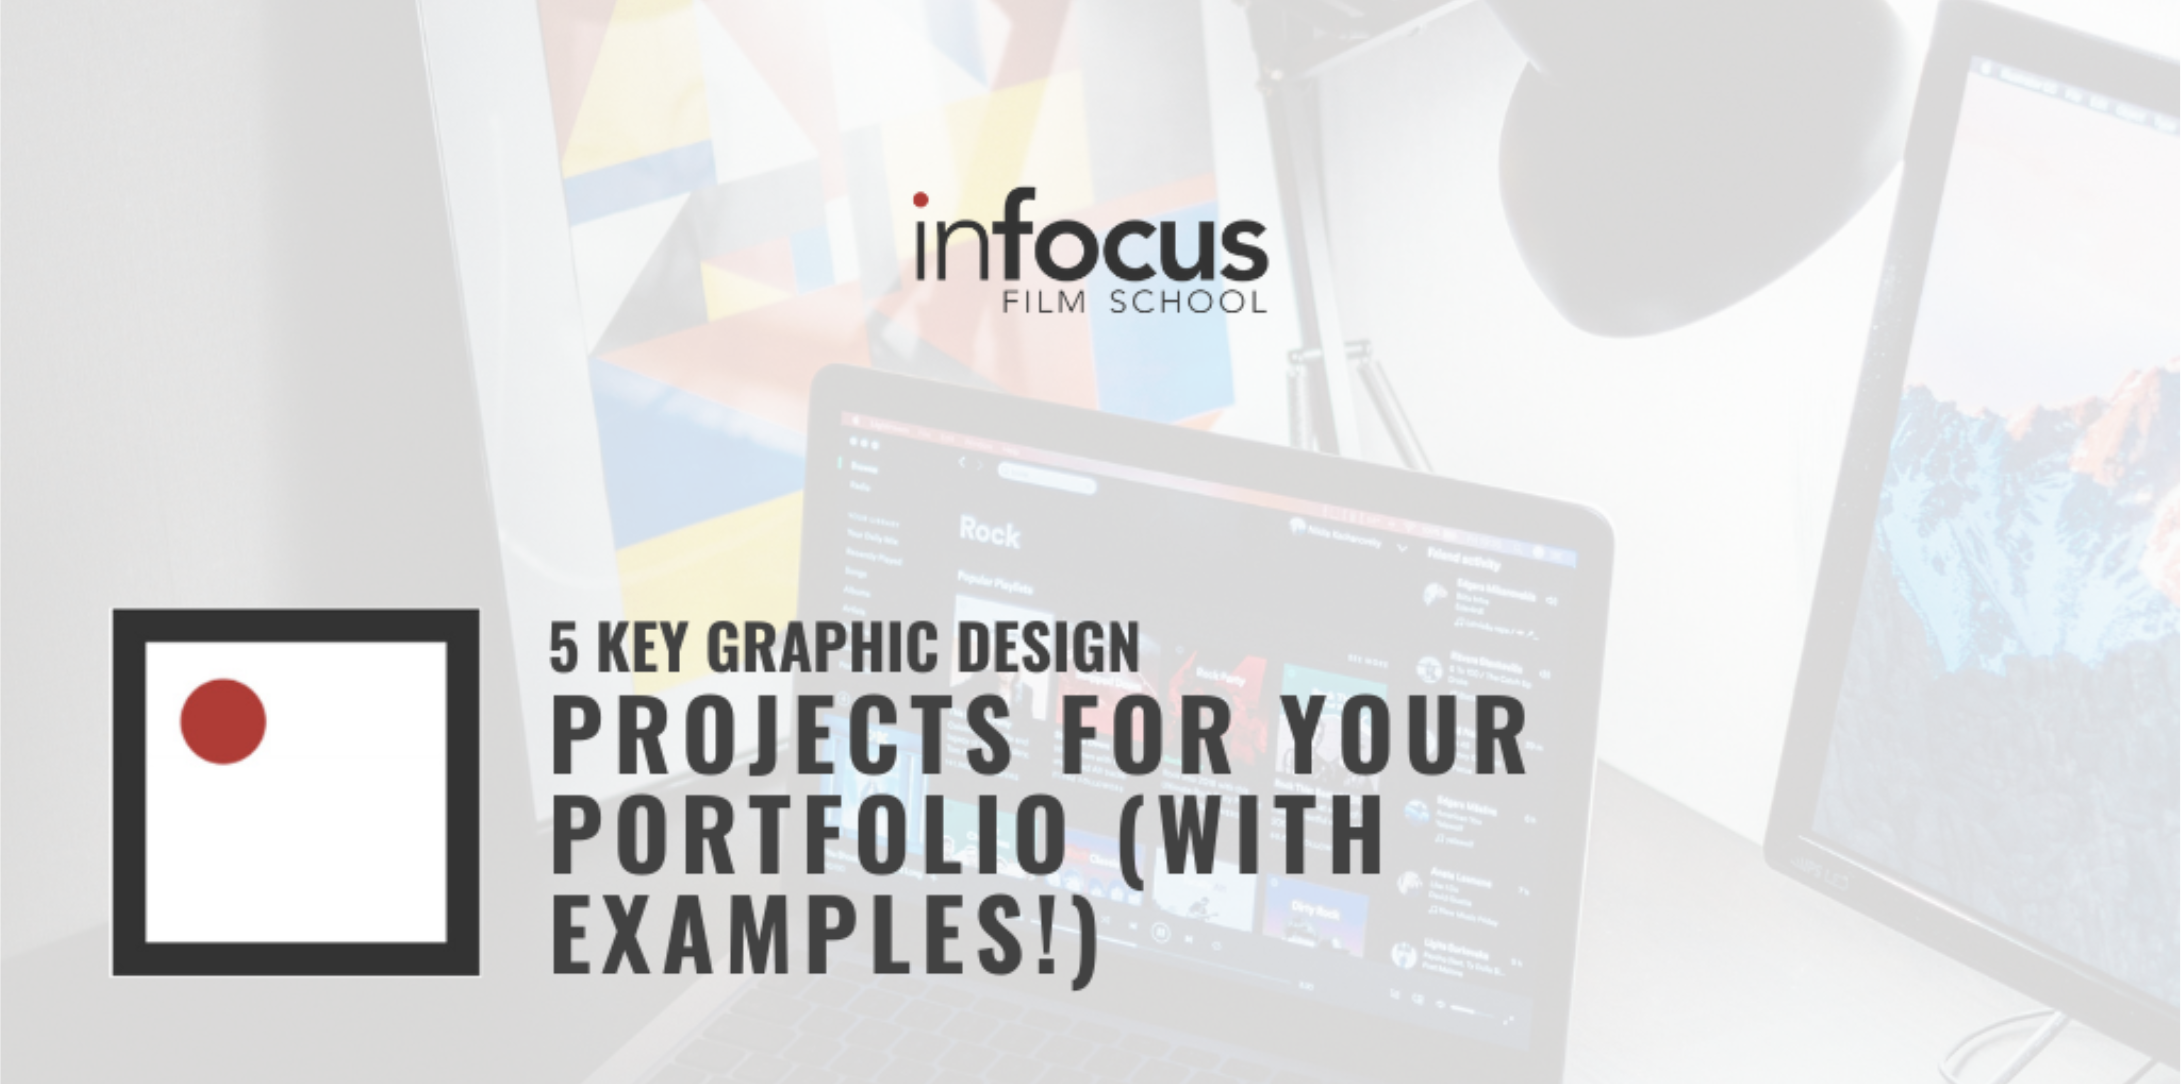 5 Key Graphic Design Projects For Your Portfolio With Examples